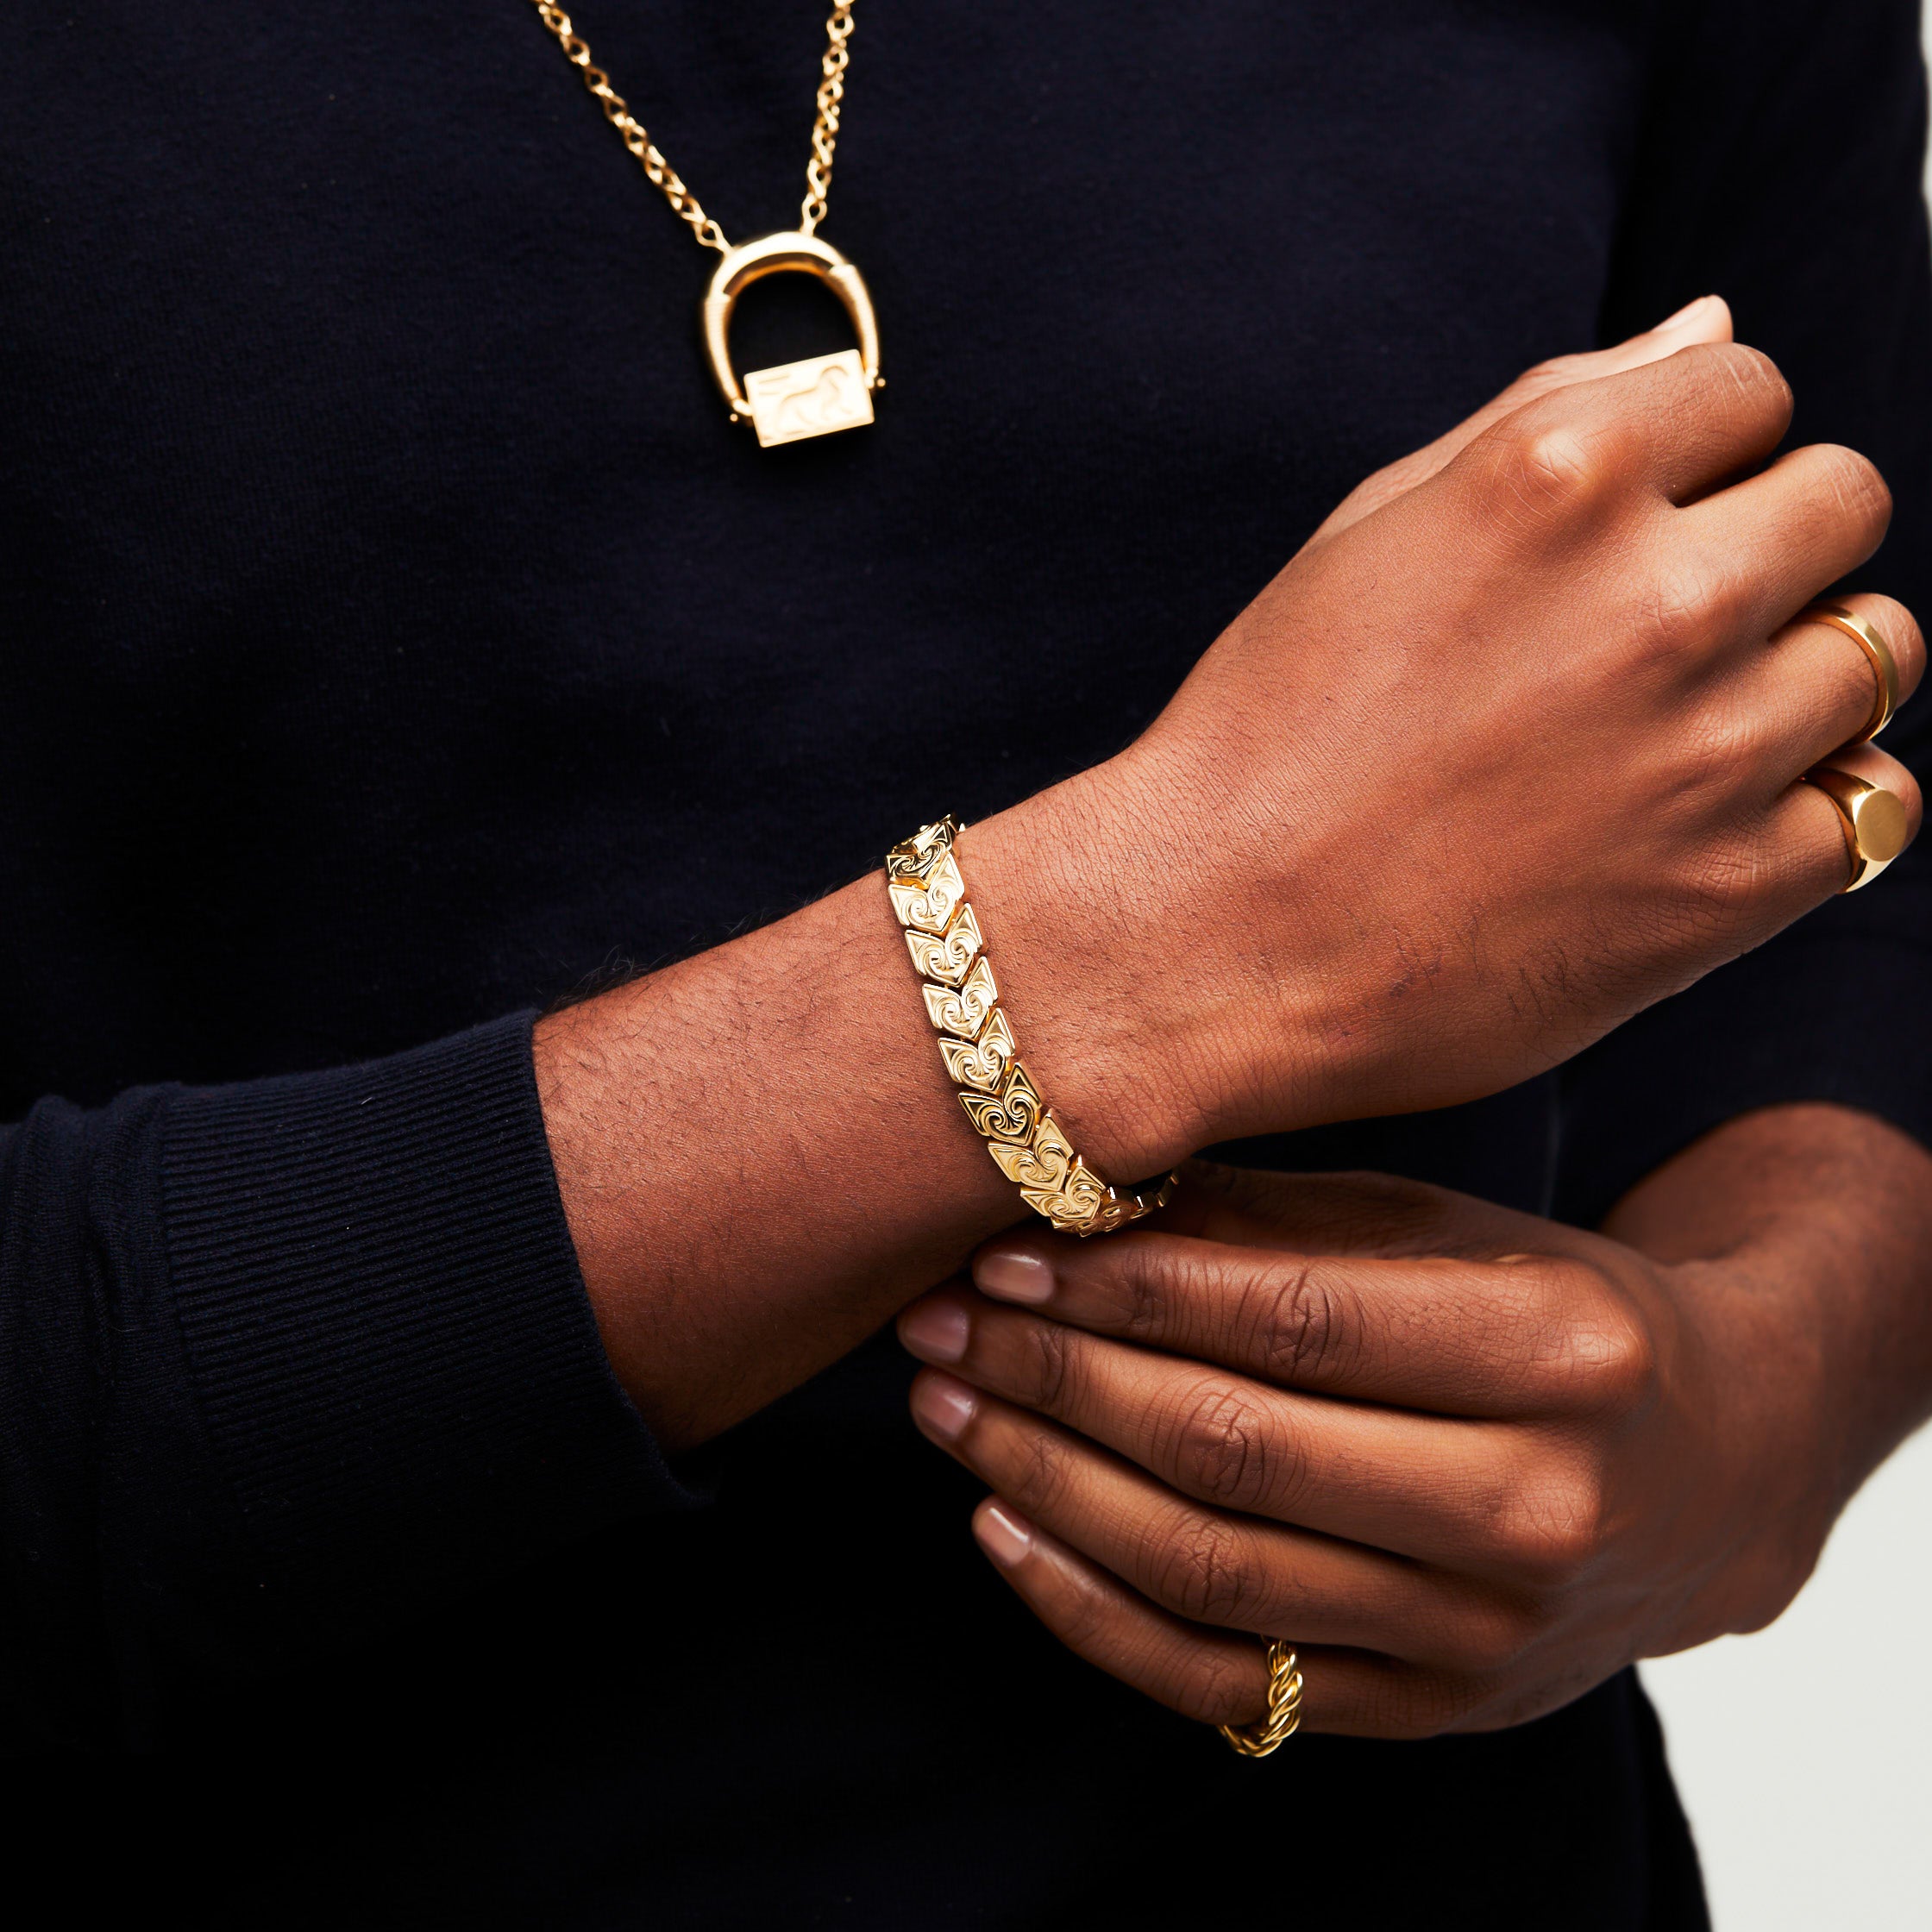 Men's Gold Bracelet by FUTURA Made in NYC